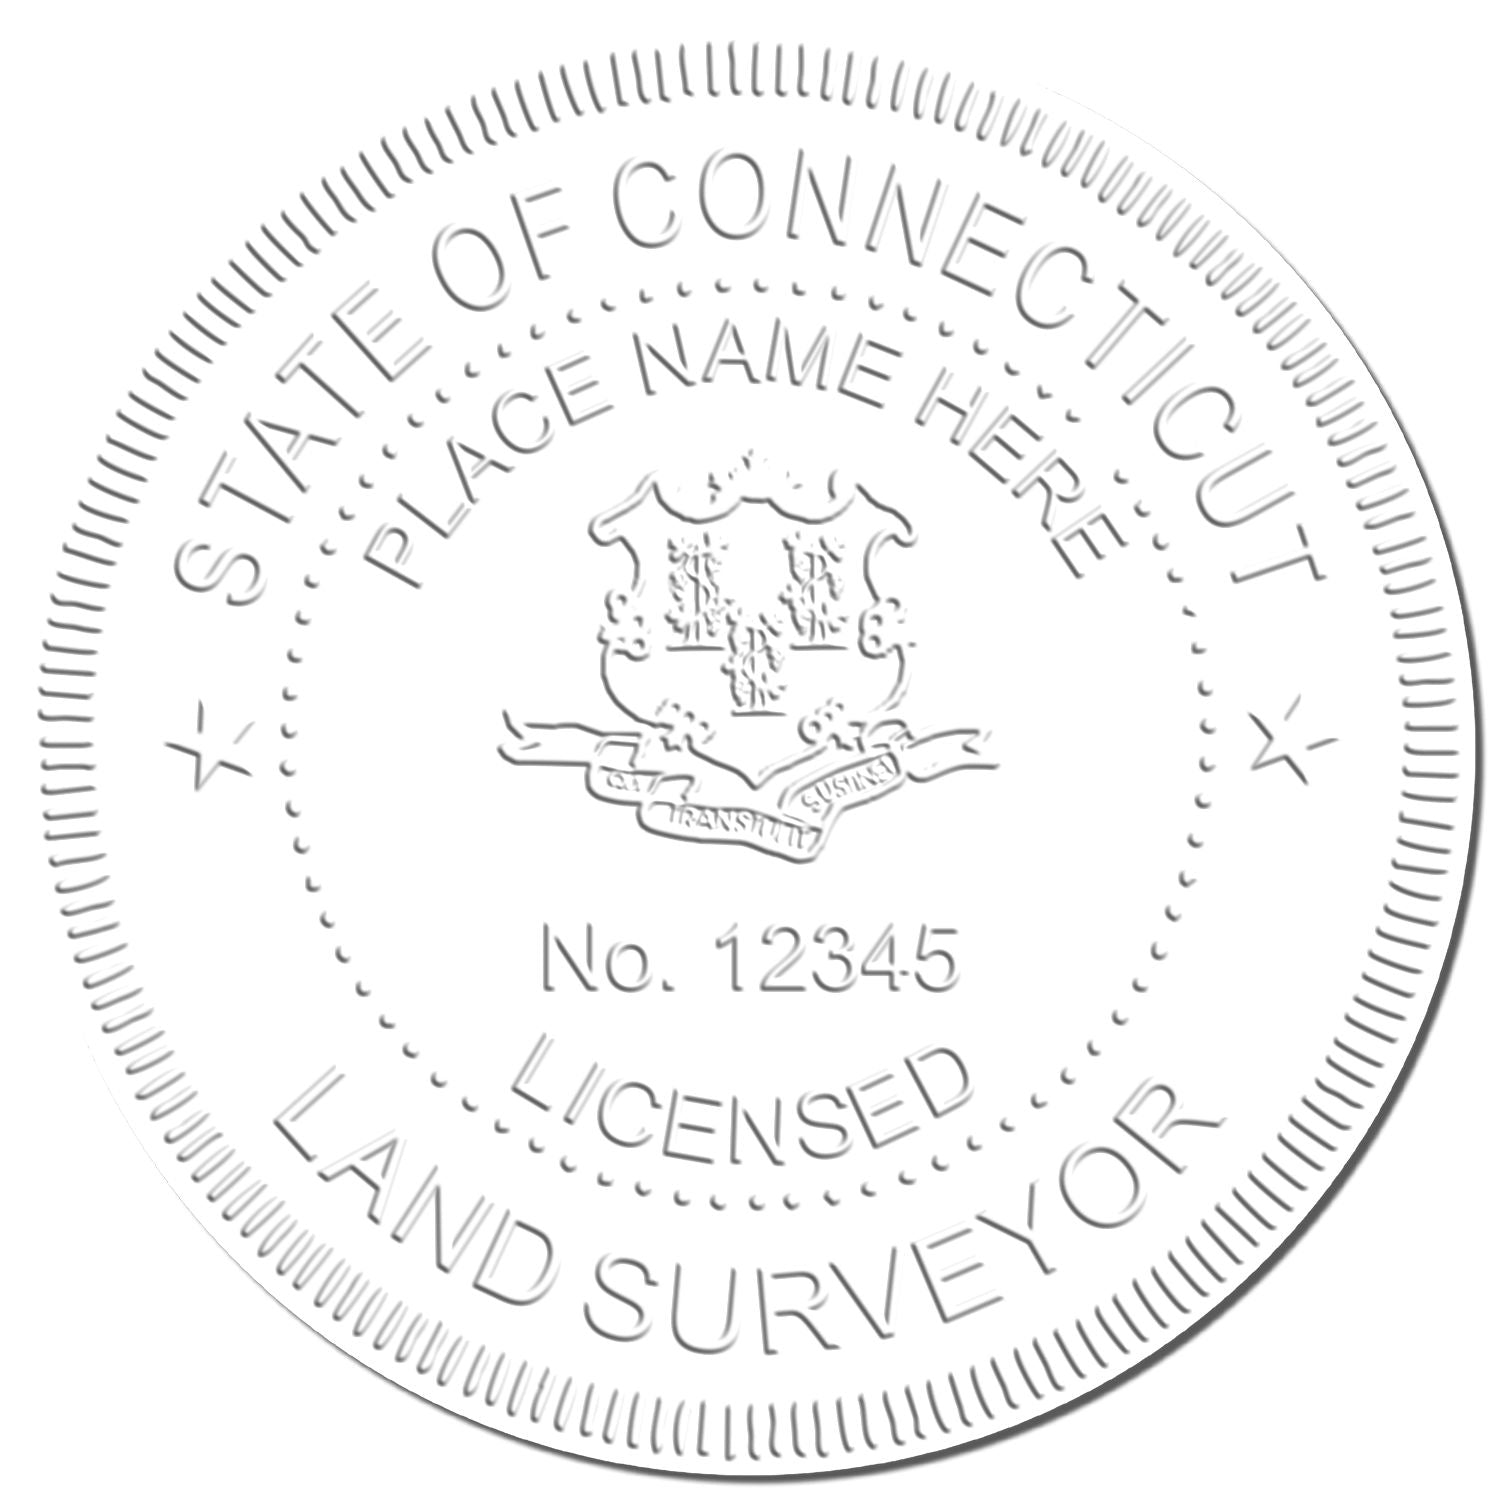 The main image for the Long Reach Connecticut Land Surveyor Seal depicting a sample of the imprint and electronic files